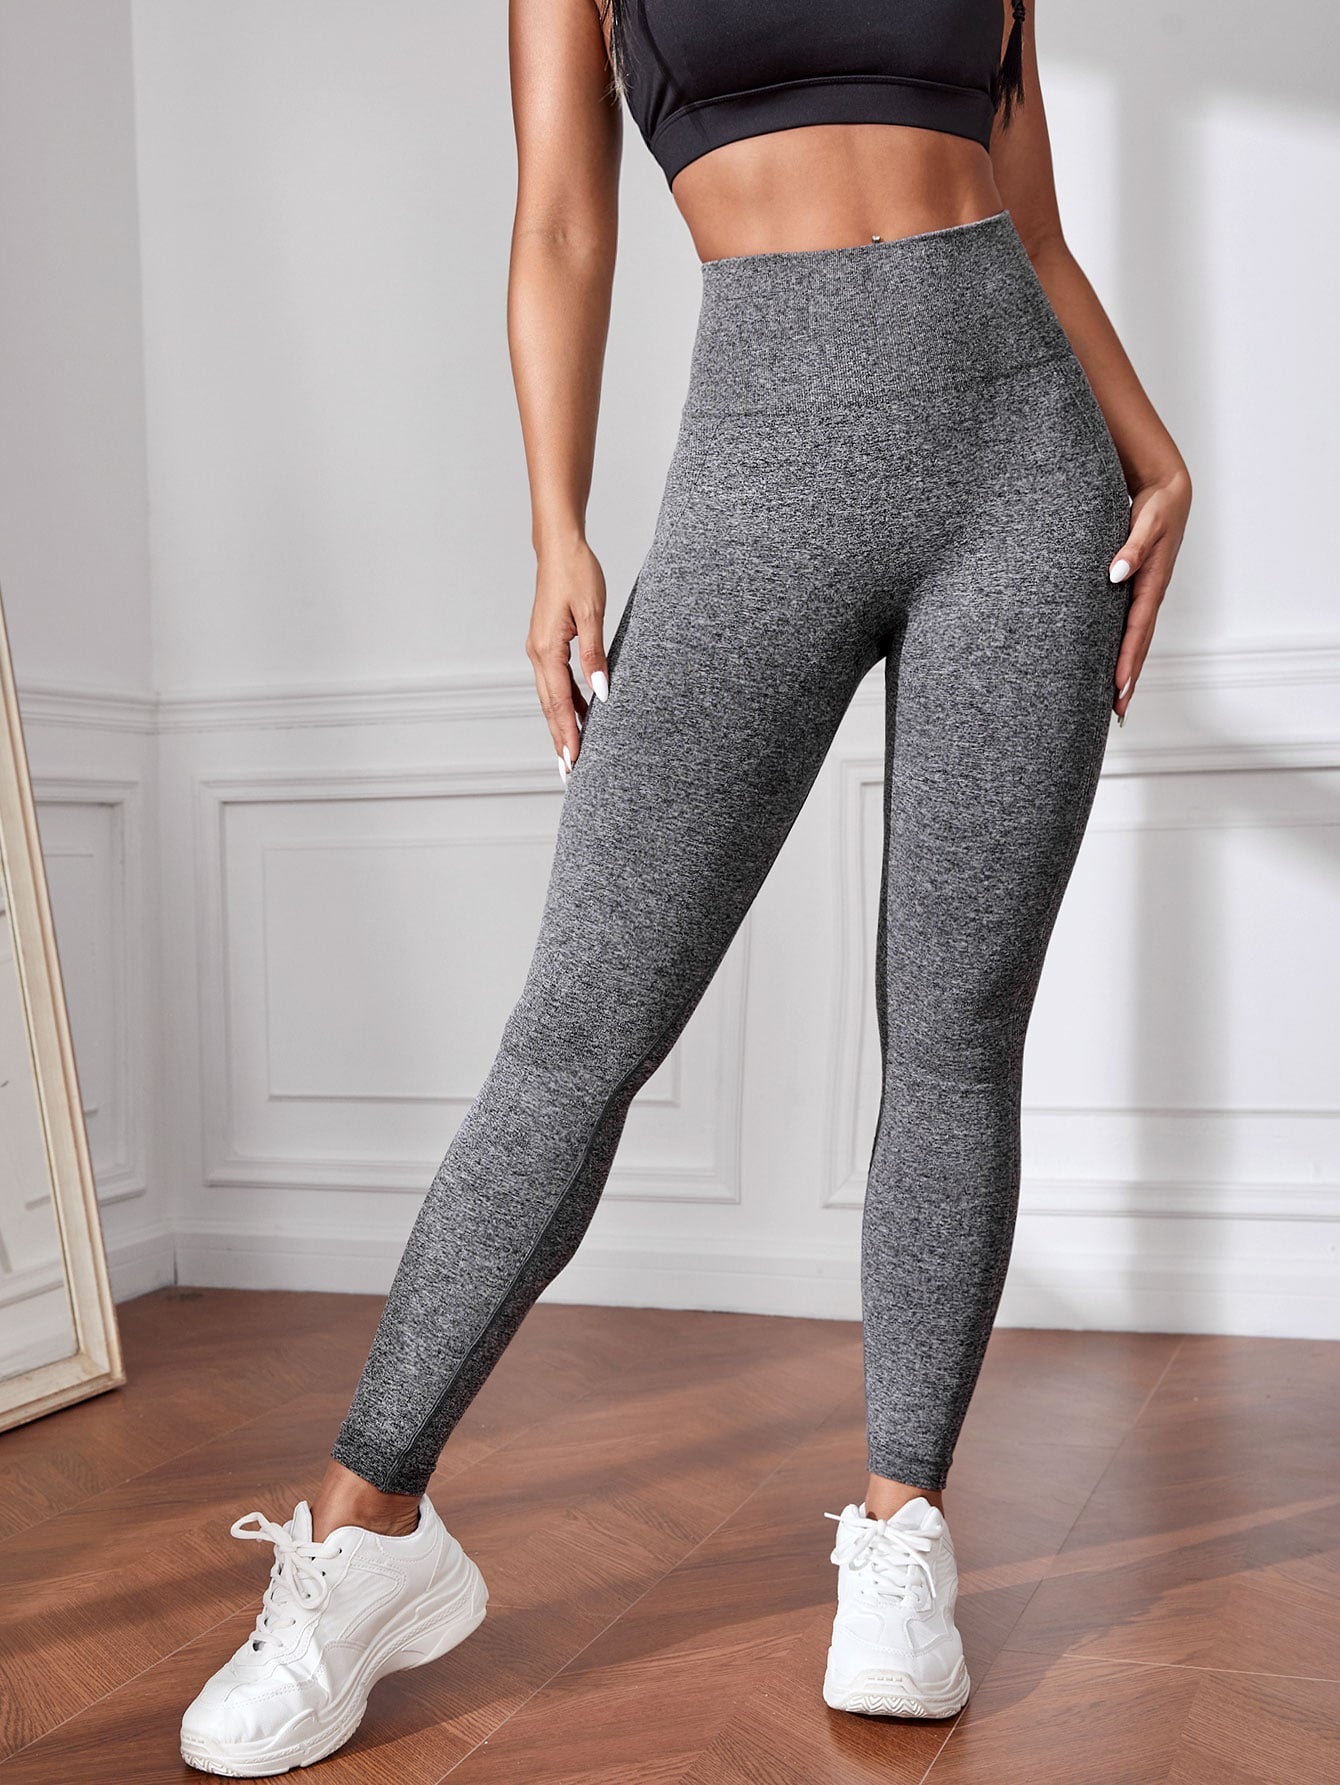 Yoga Basic Workout Leggings Marled Knit Seamless Tummy Control Athletic  Tights With Wide Waistband